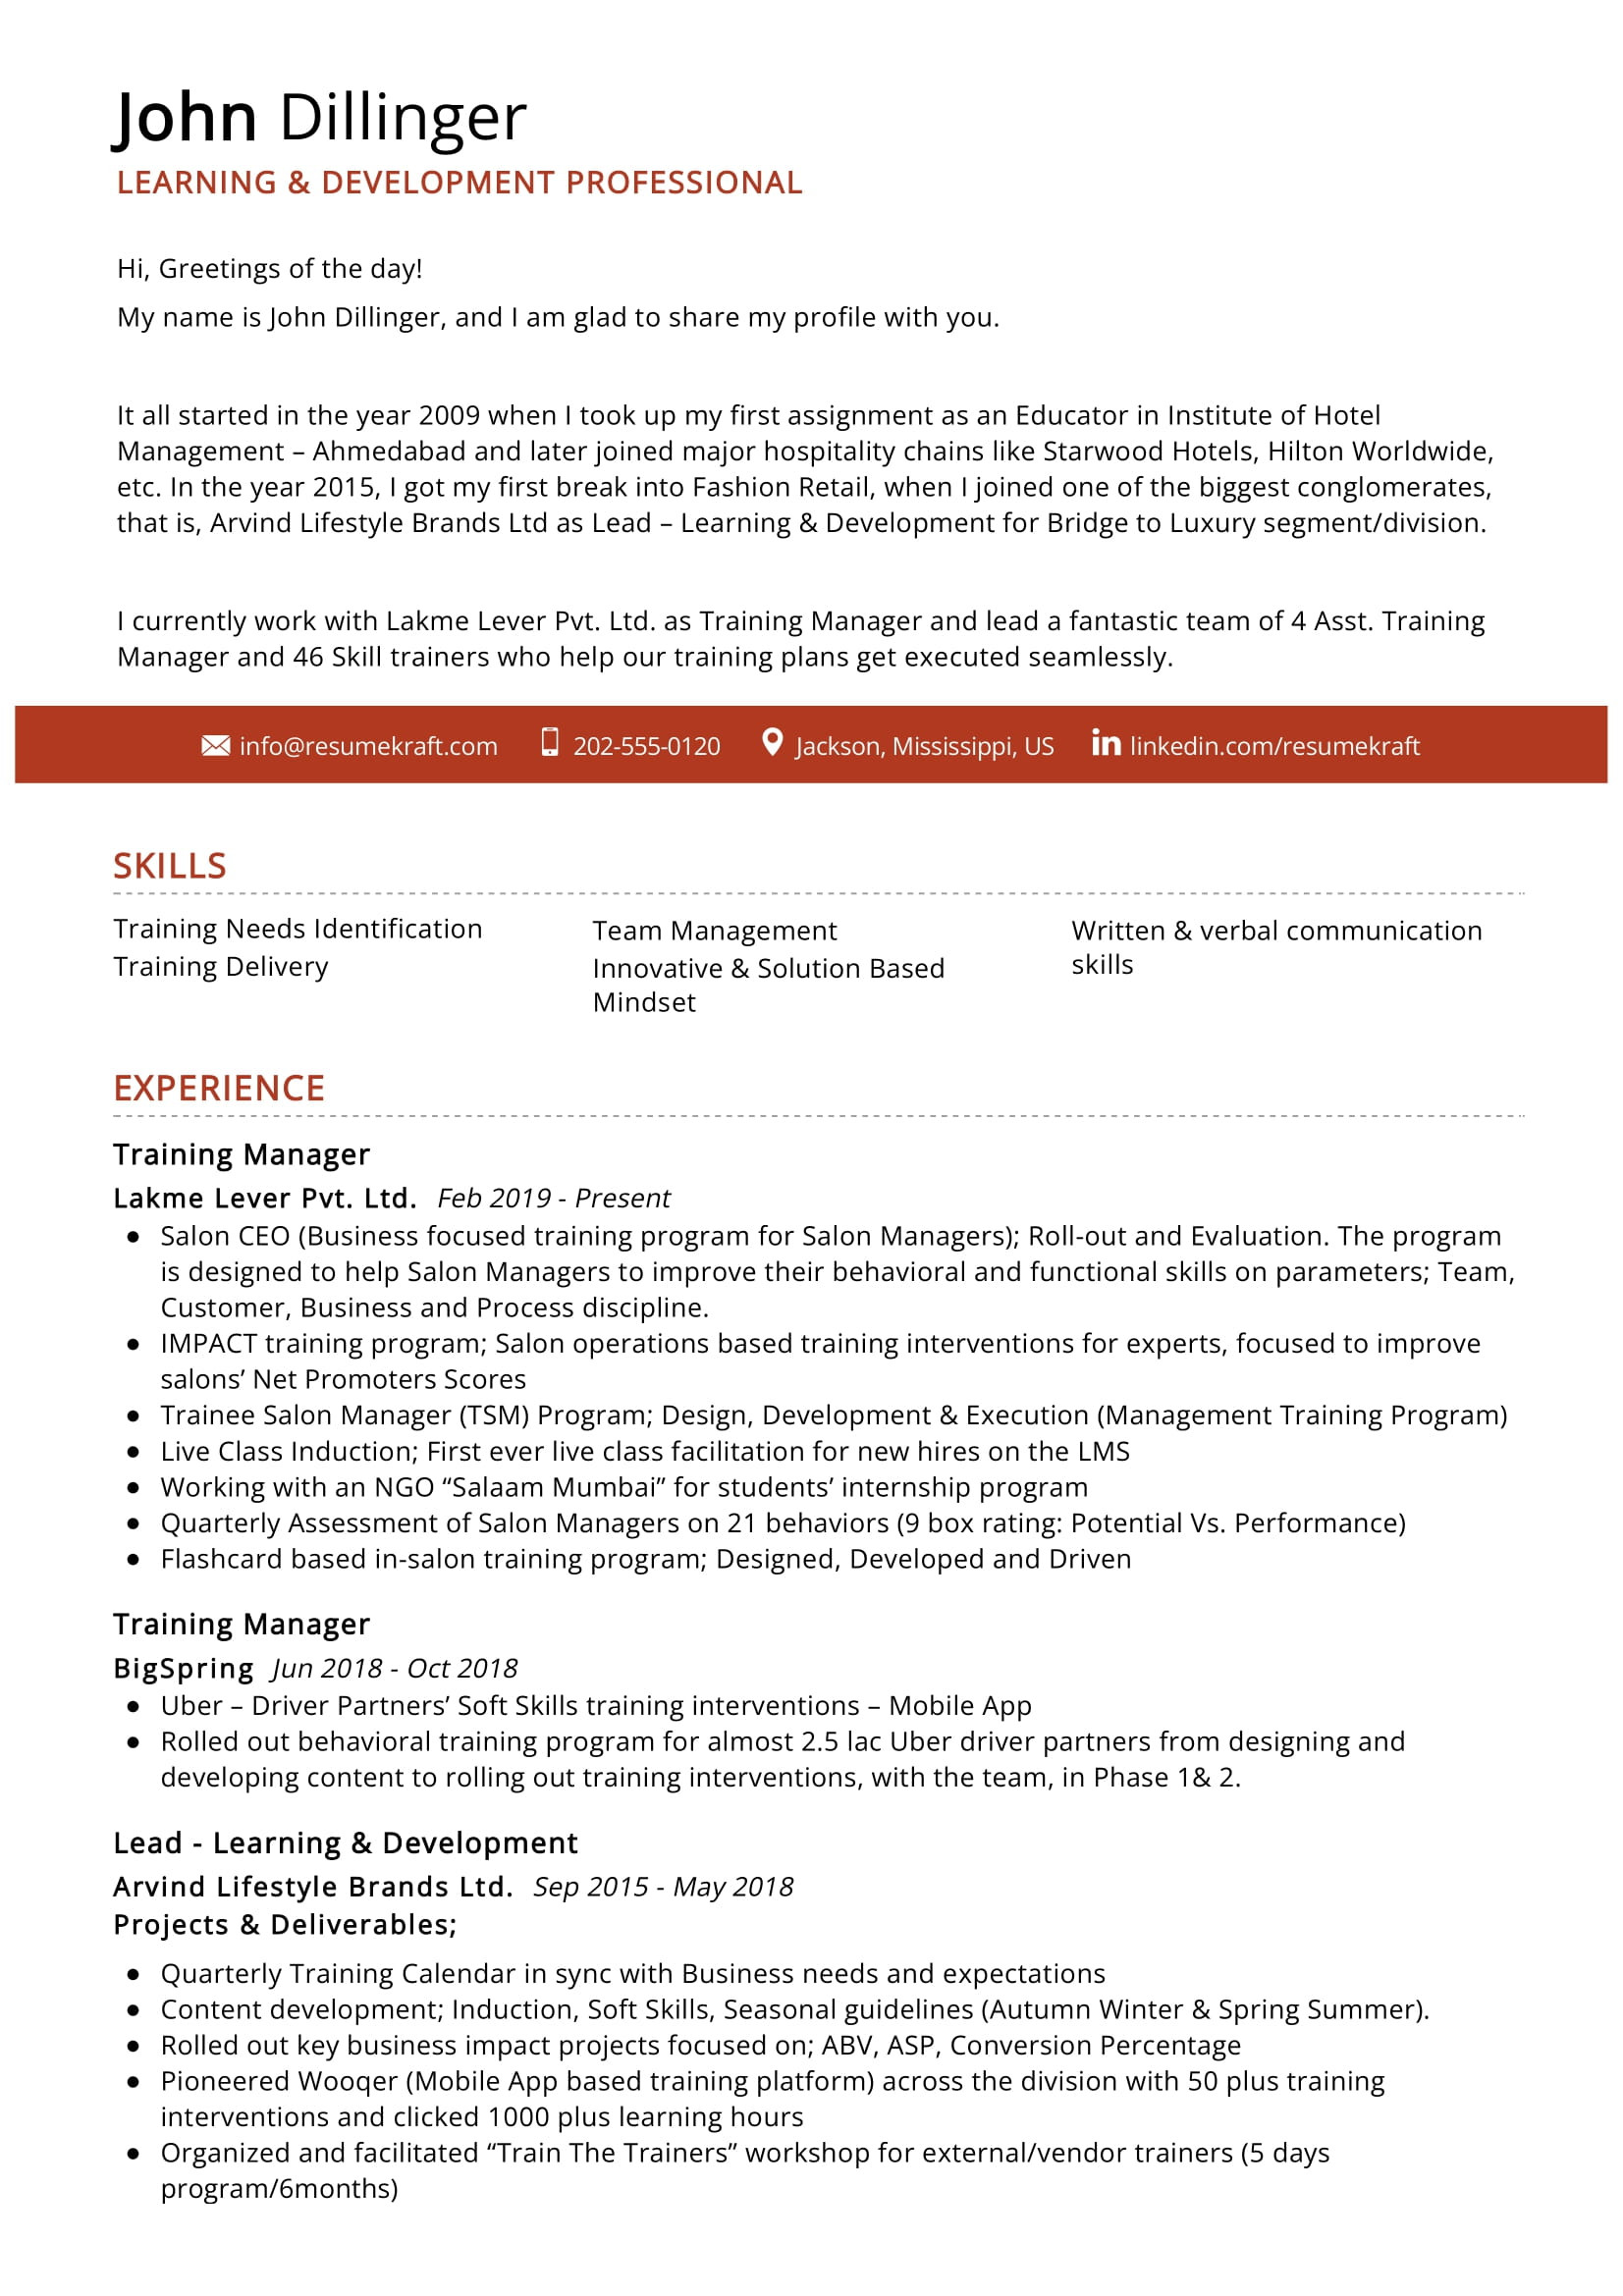 Learning and Development Director Resume Sample Learning & Development Professional Resume 2022 Writing Tips …